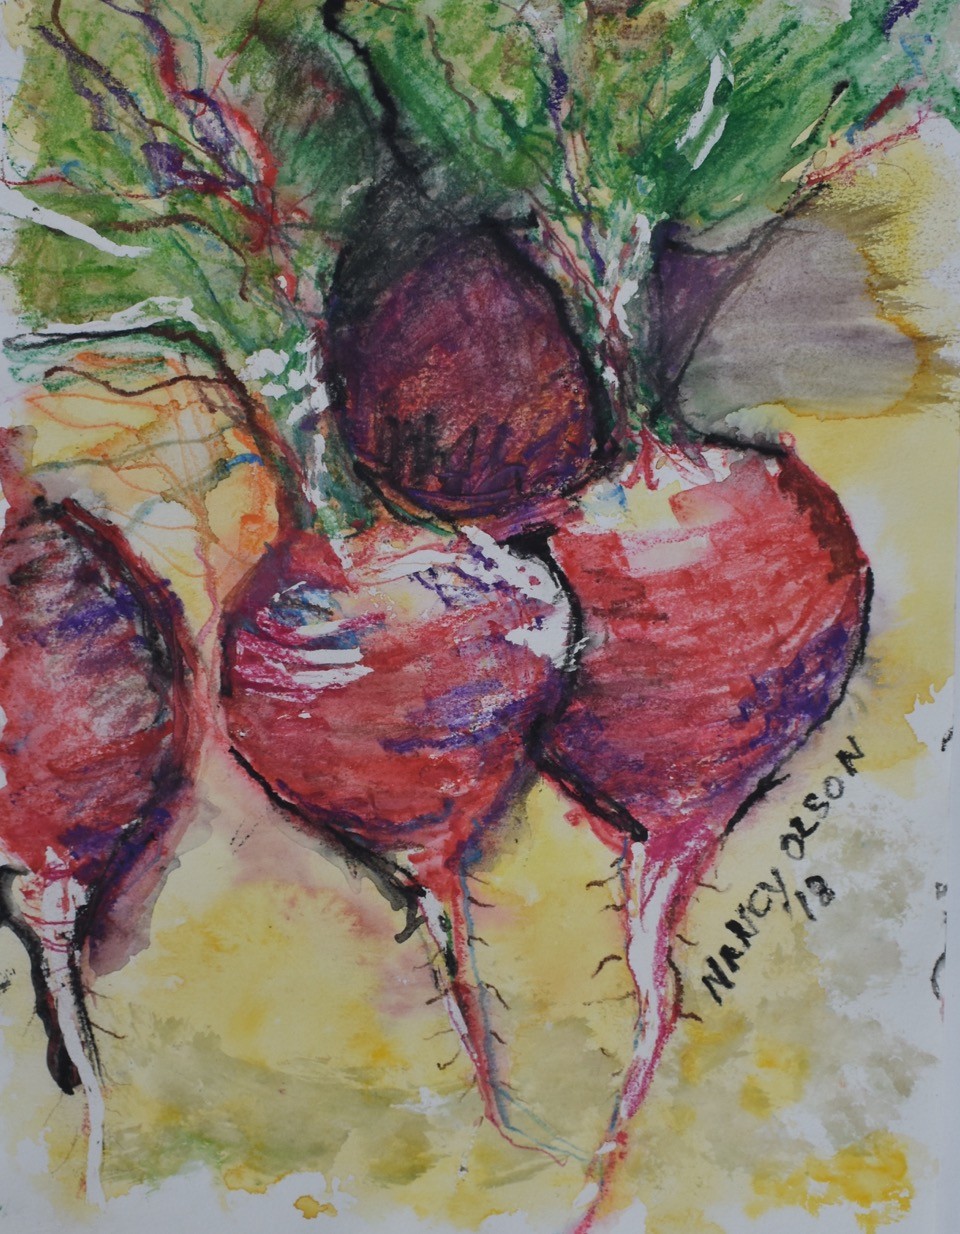 A painting of a bunch of four beets, which have green leaves at the top and a rich dark red for the body of the beet, against a light brown dirt-like background.